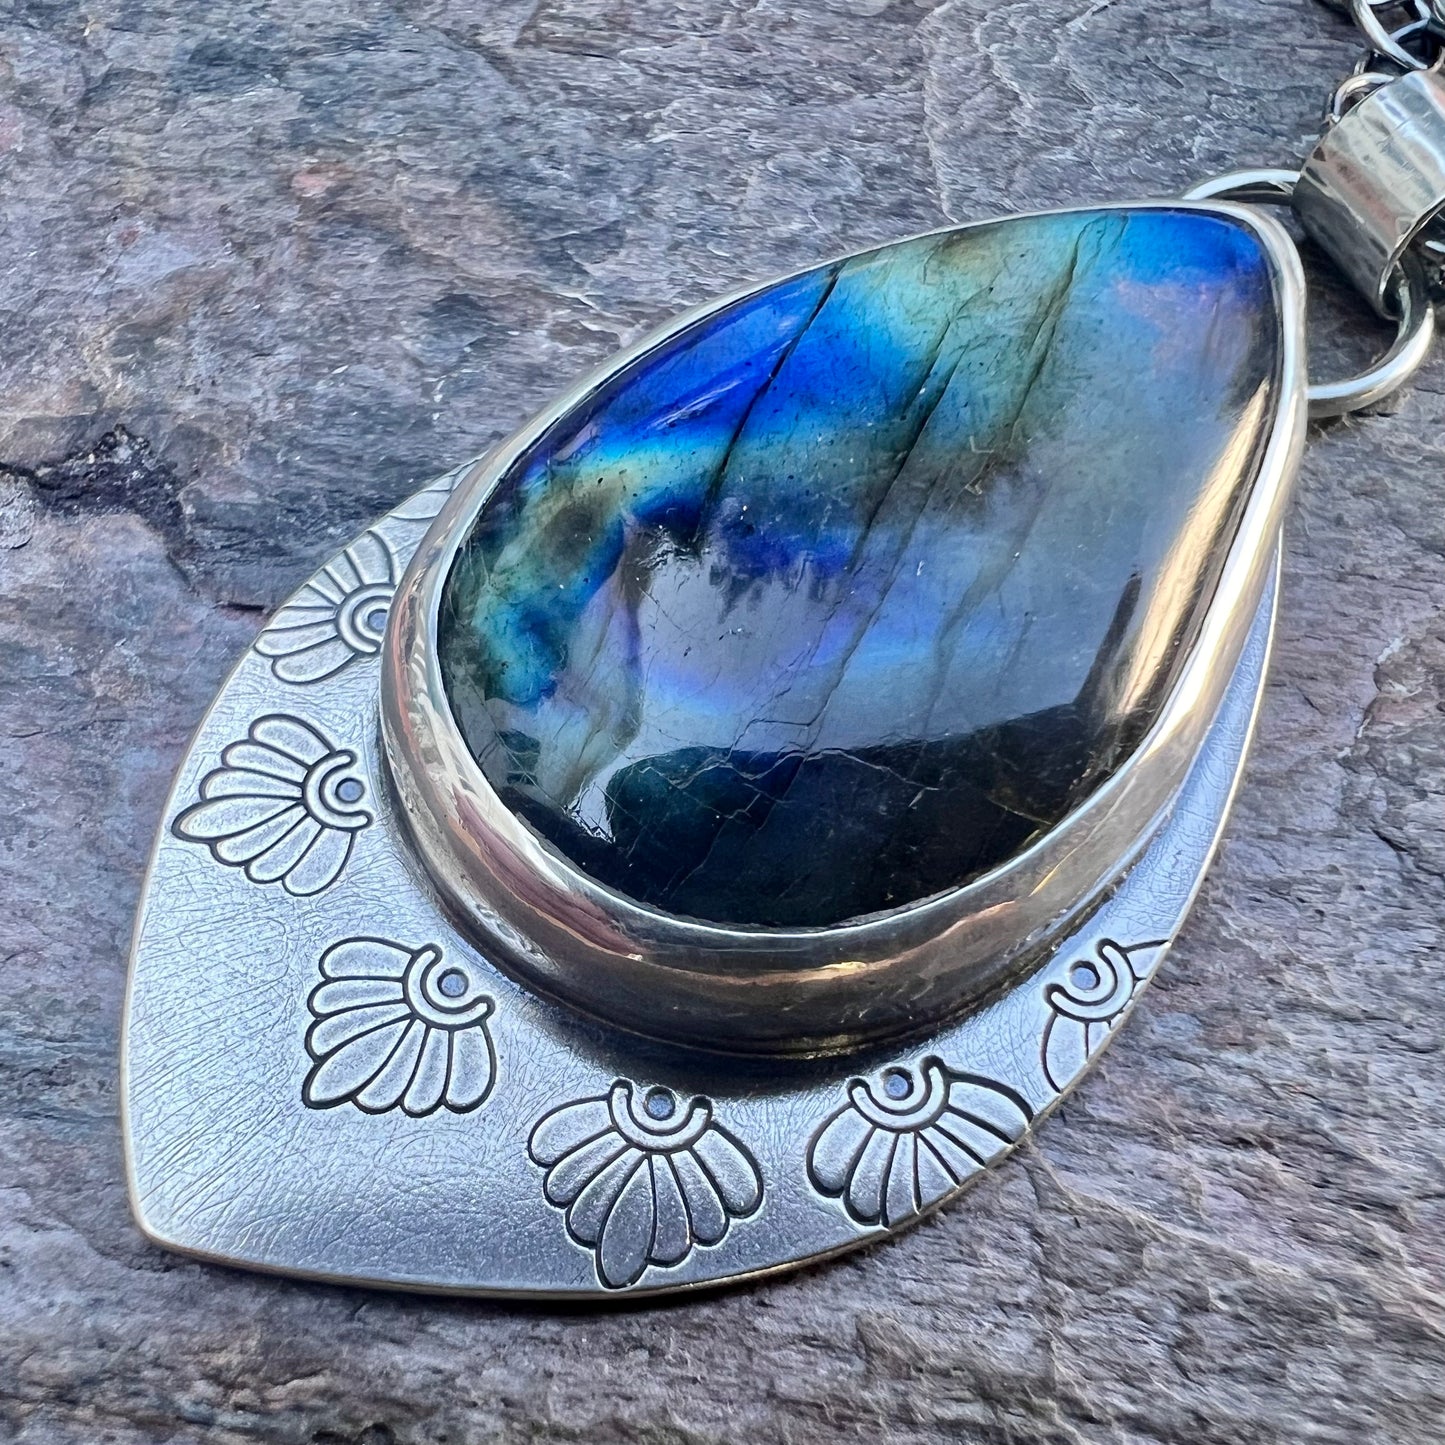 Labradorite Sterling Silver Necklace - Handmade One-of-a-kind Pendant on Sterling Silver Chain